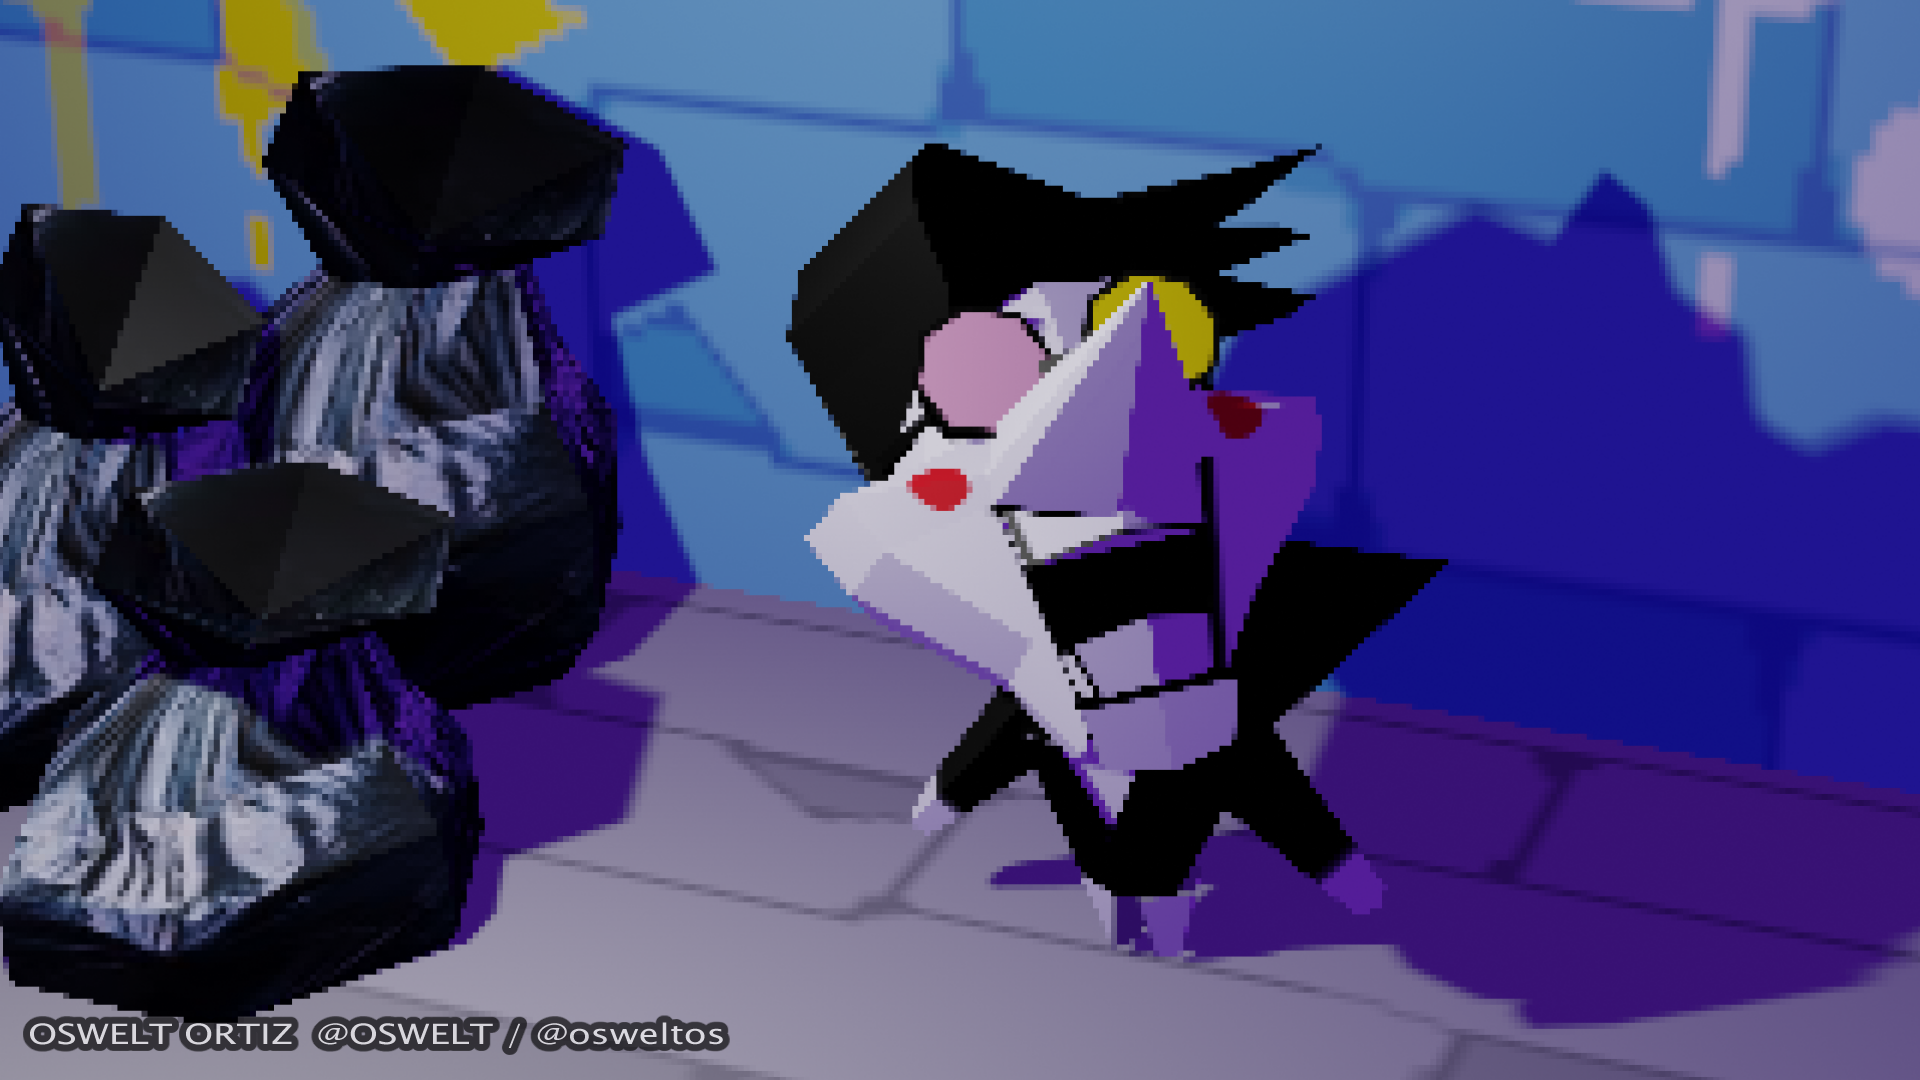 Spamton lowpoly model inspired by psx graphics: Deltarune